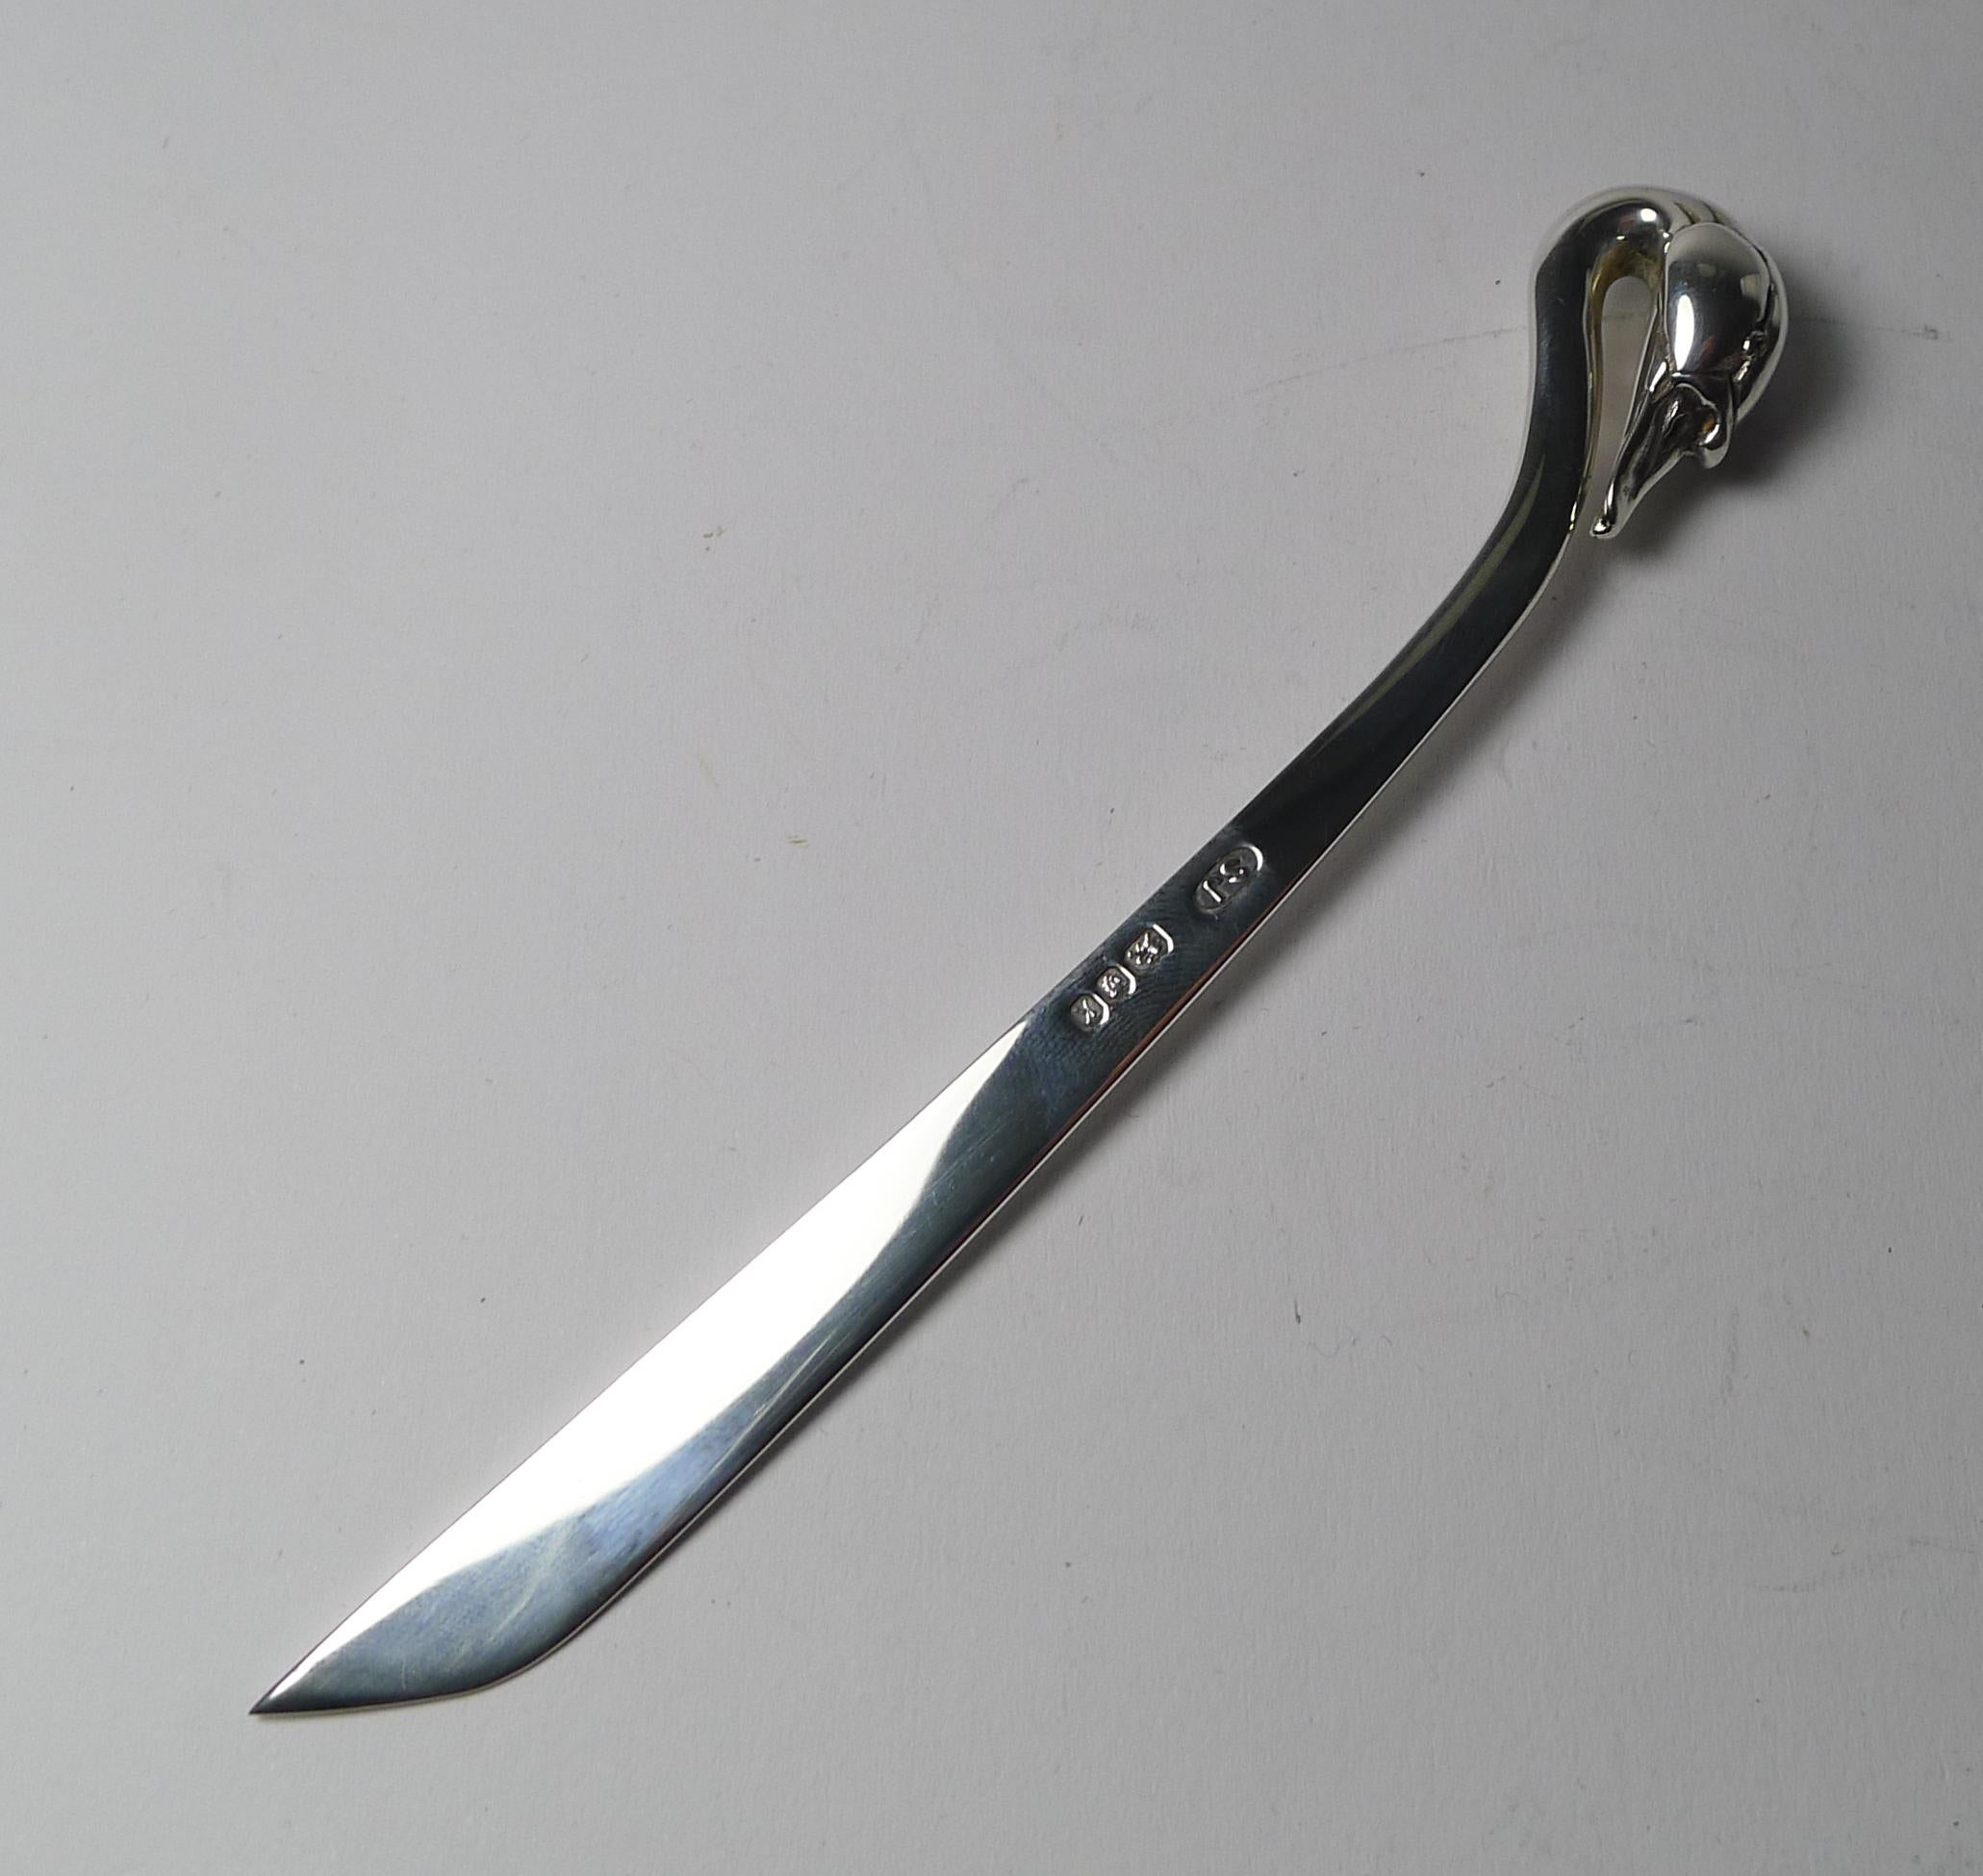 A wonderful top quality letter opener by the well renowned modern silversmith, Sarah Jones.

This beautiful example has a handle created from an elegant Swan's head with it's long neck blending into the opener's blade.

The silver is fully